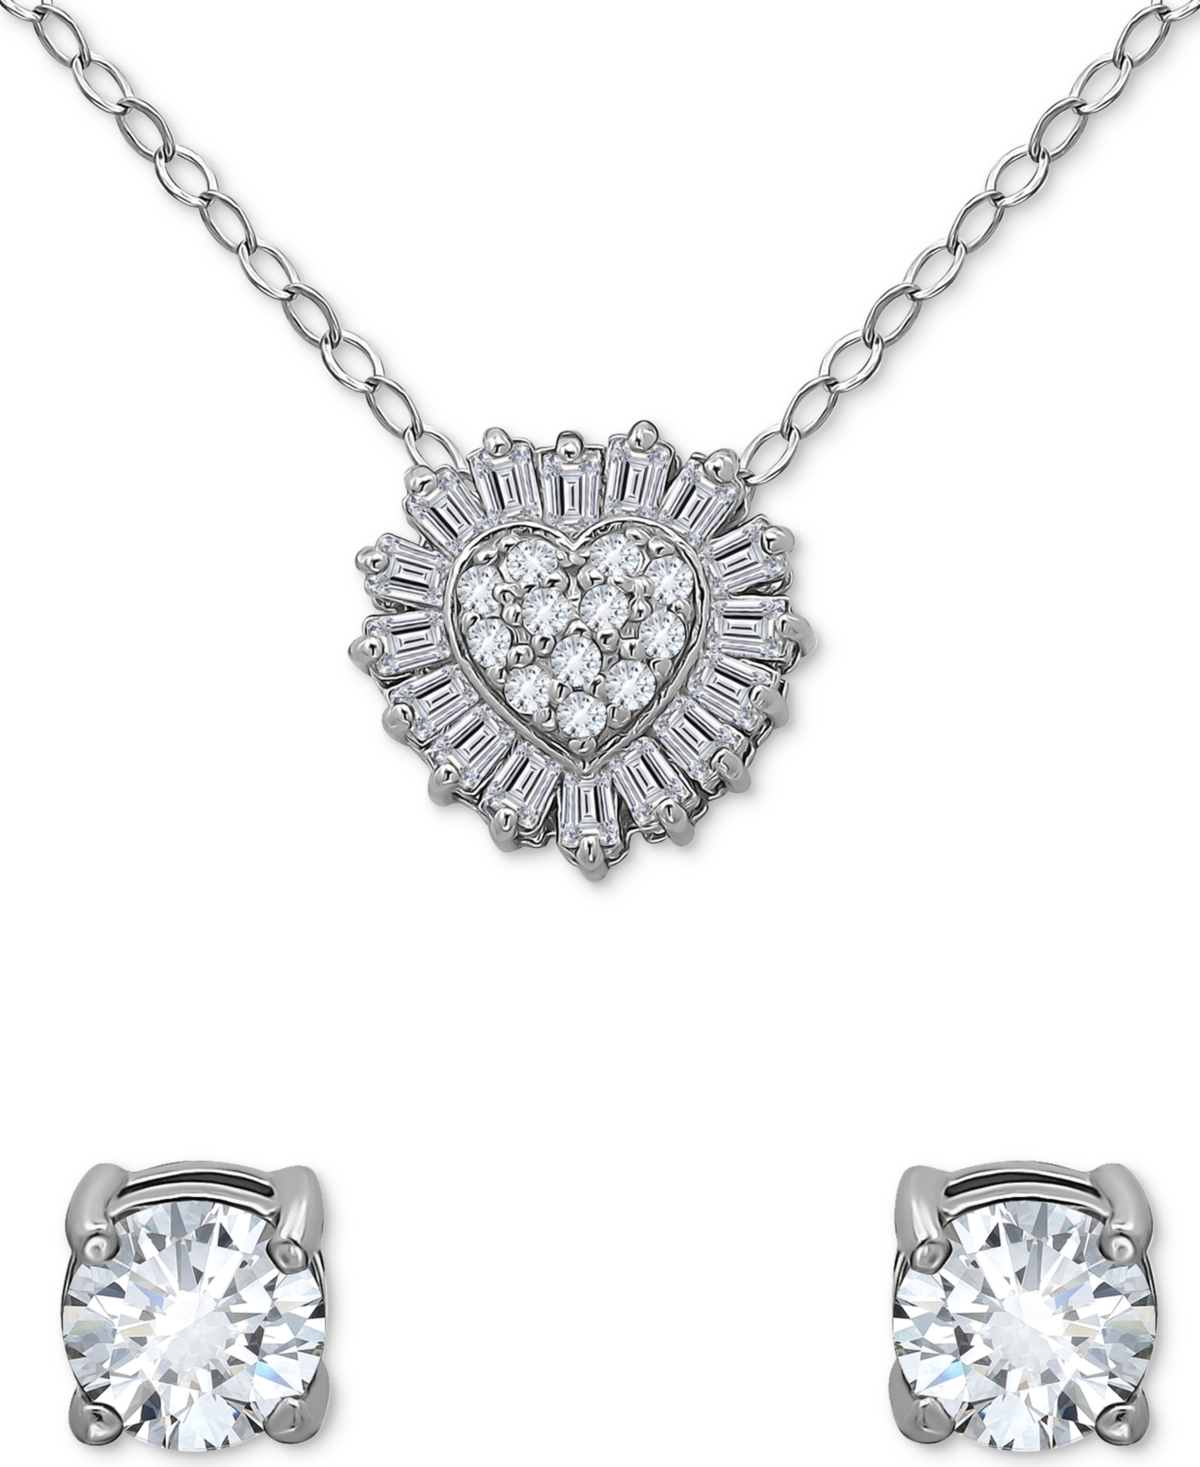 Giani Bernini 2-pc. Set Cubic Zirconia Heart Pendant Necklace & Solitaire Stud Earrings, Created For Macy's In Silver